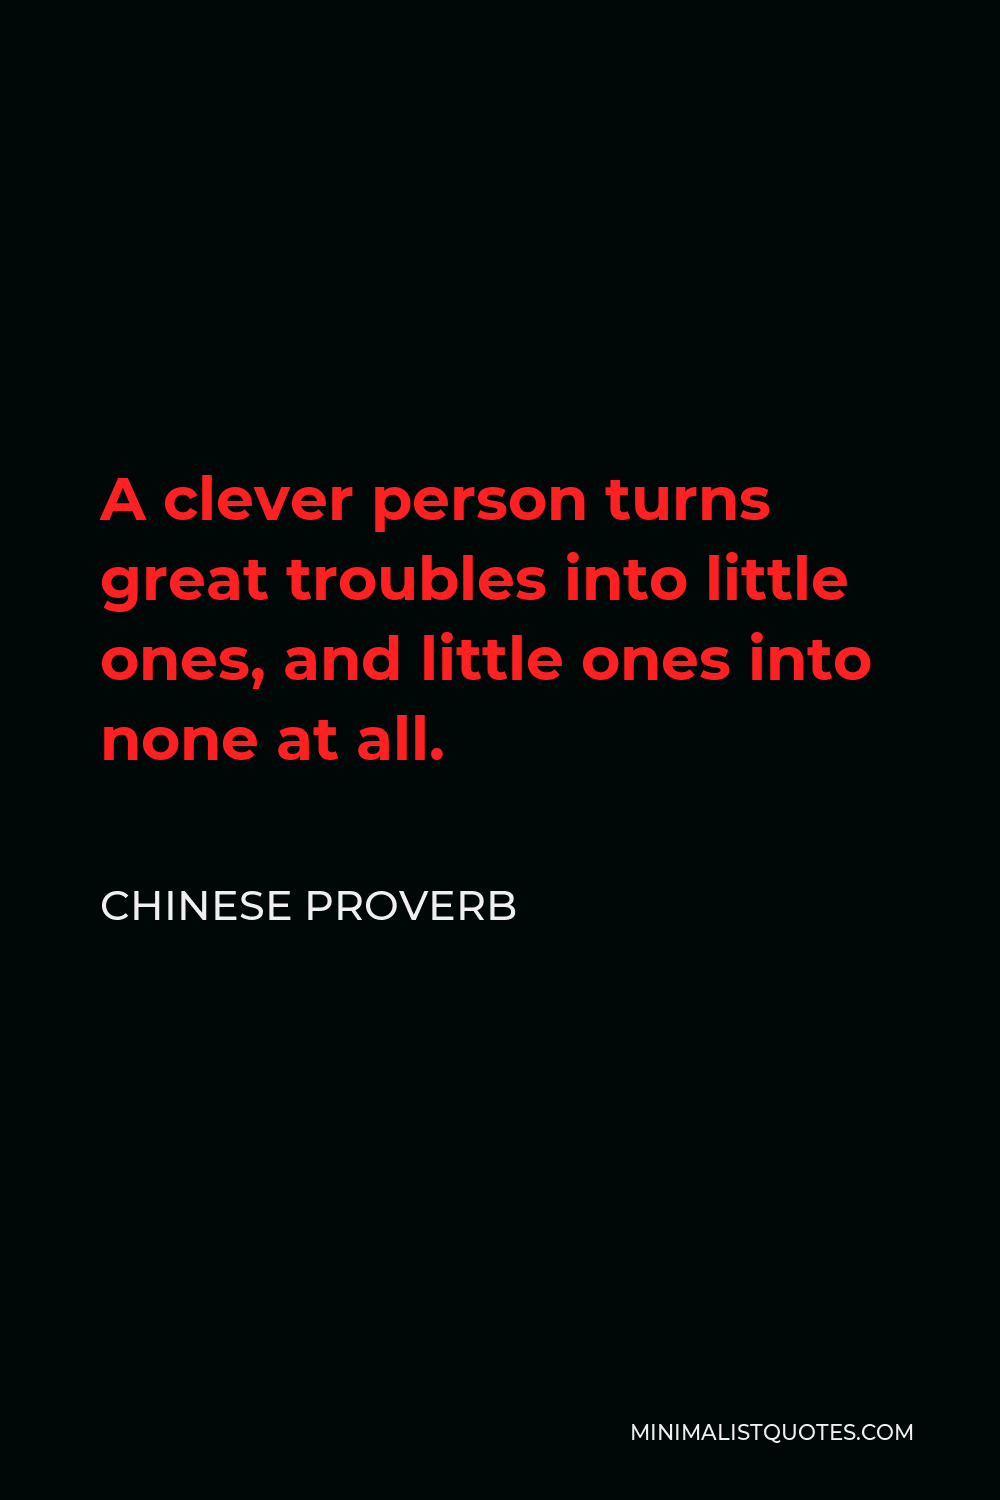 Chinese Proverb Quote - A clever person turns great troubles into little ones, and little ones into none at all.